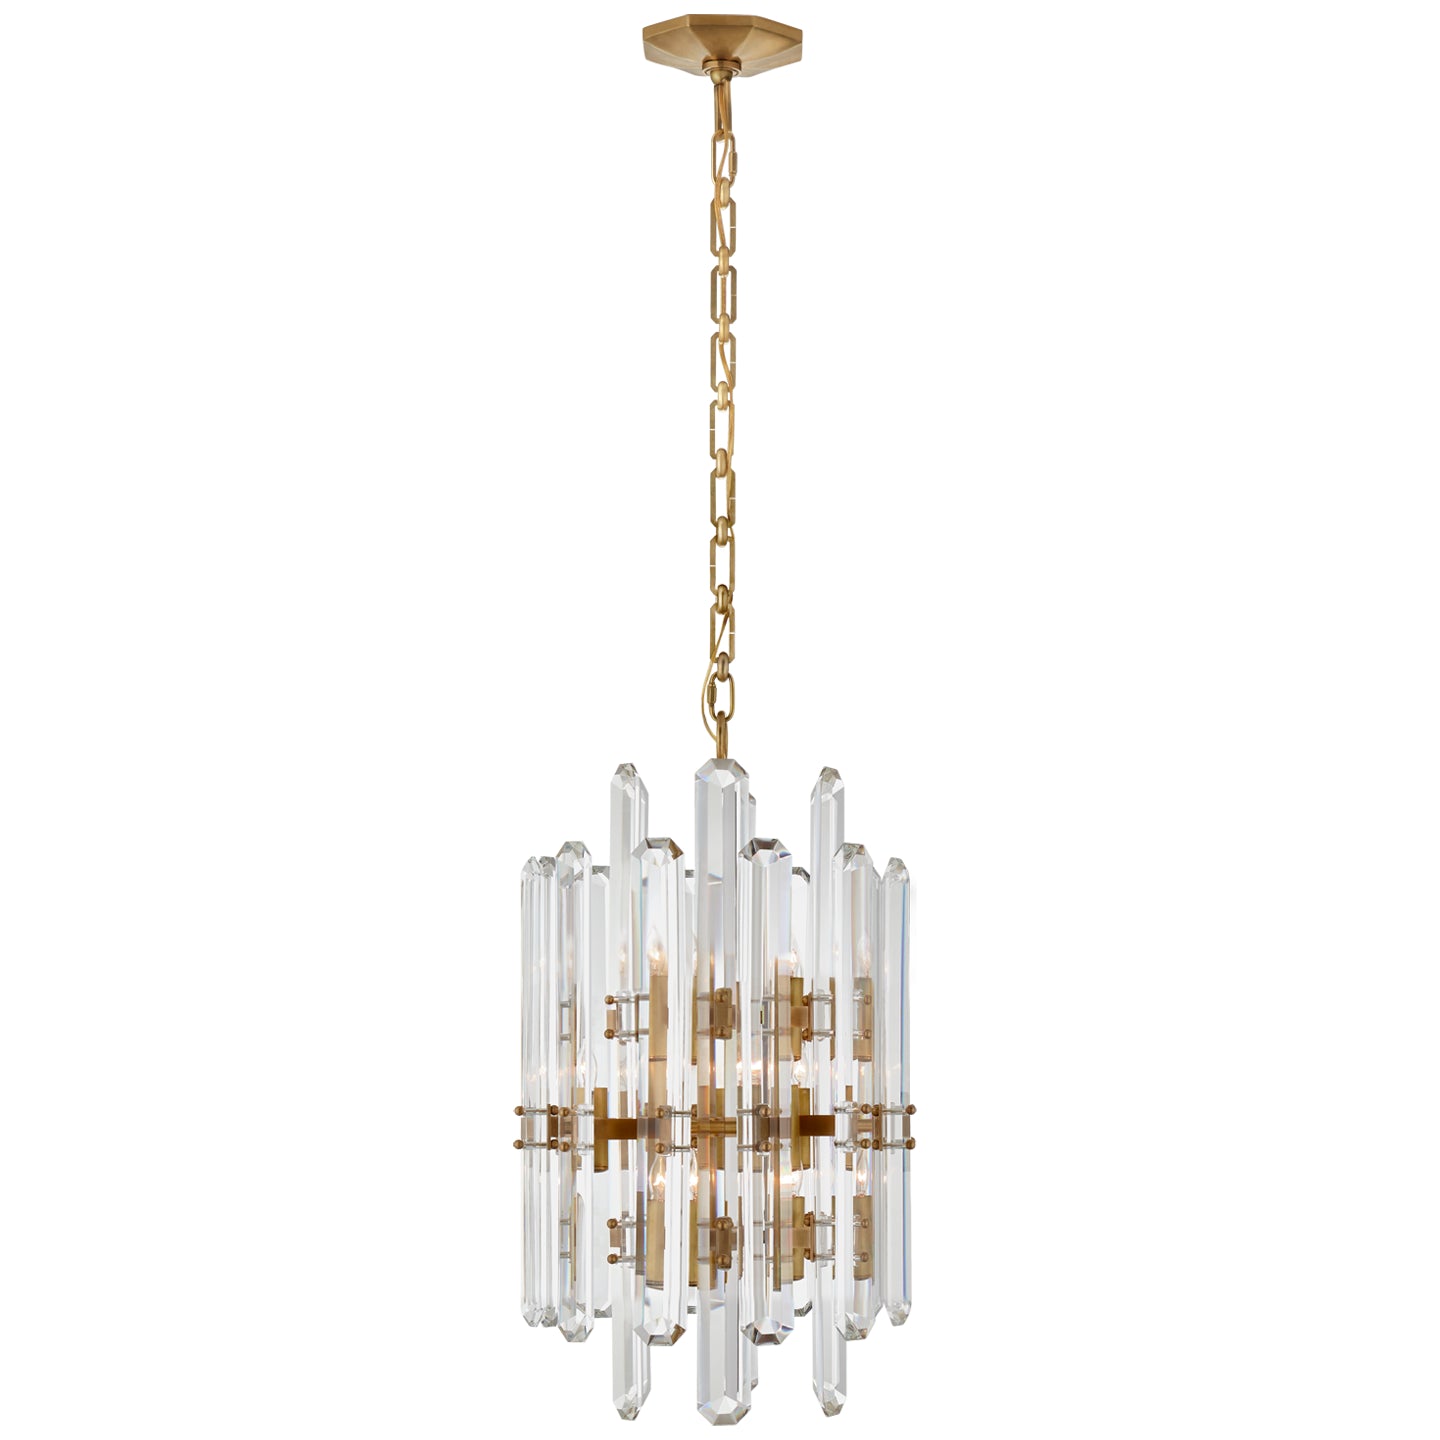 Load image into Gallery viewer, Visual Comfort Signature - ARN 5128HAB - 12 Light Chandelier - Bonnington - Hand-Rubbed Antique Brass
